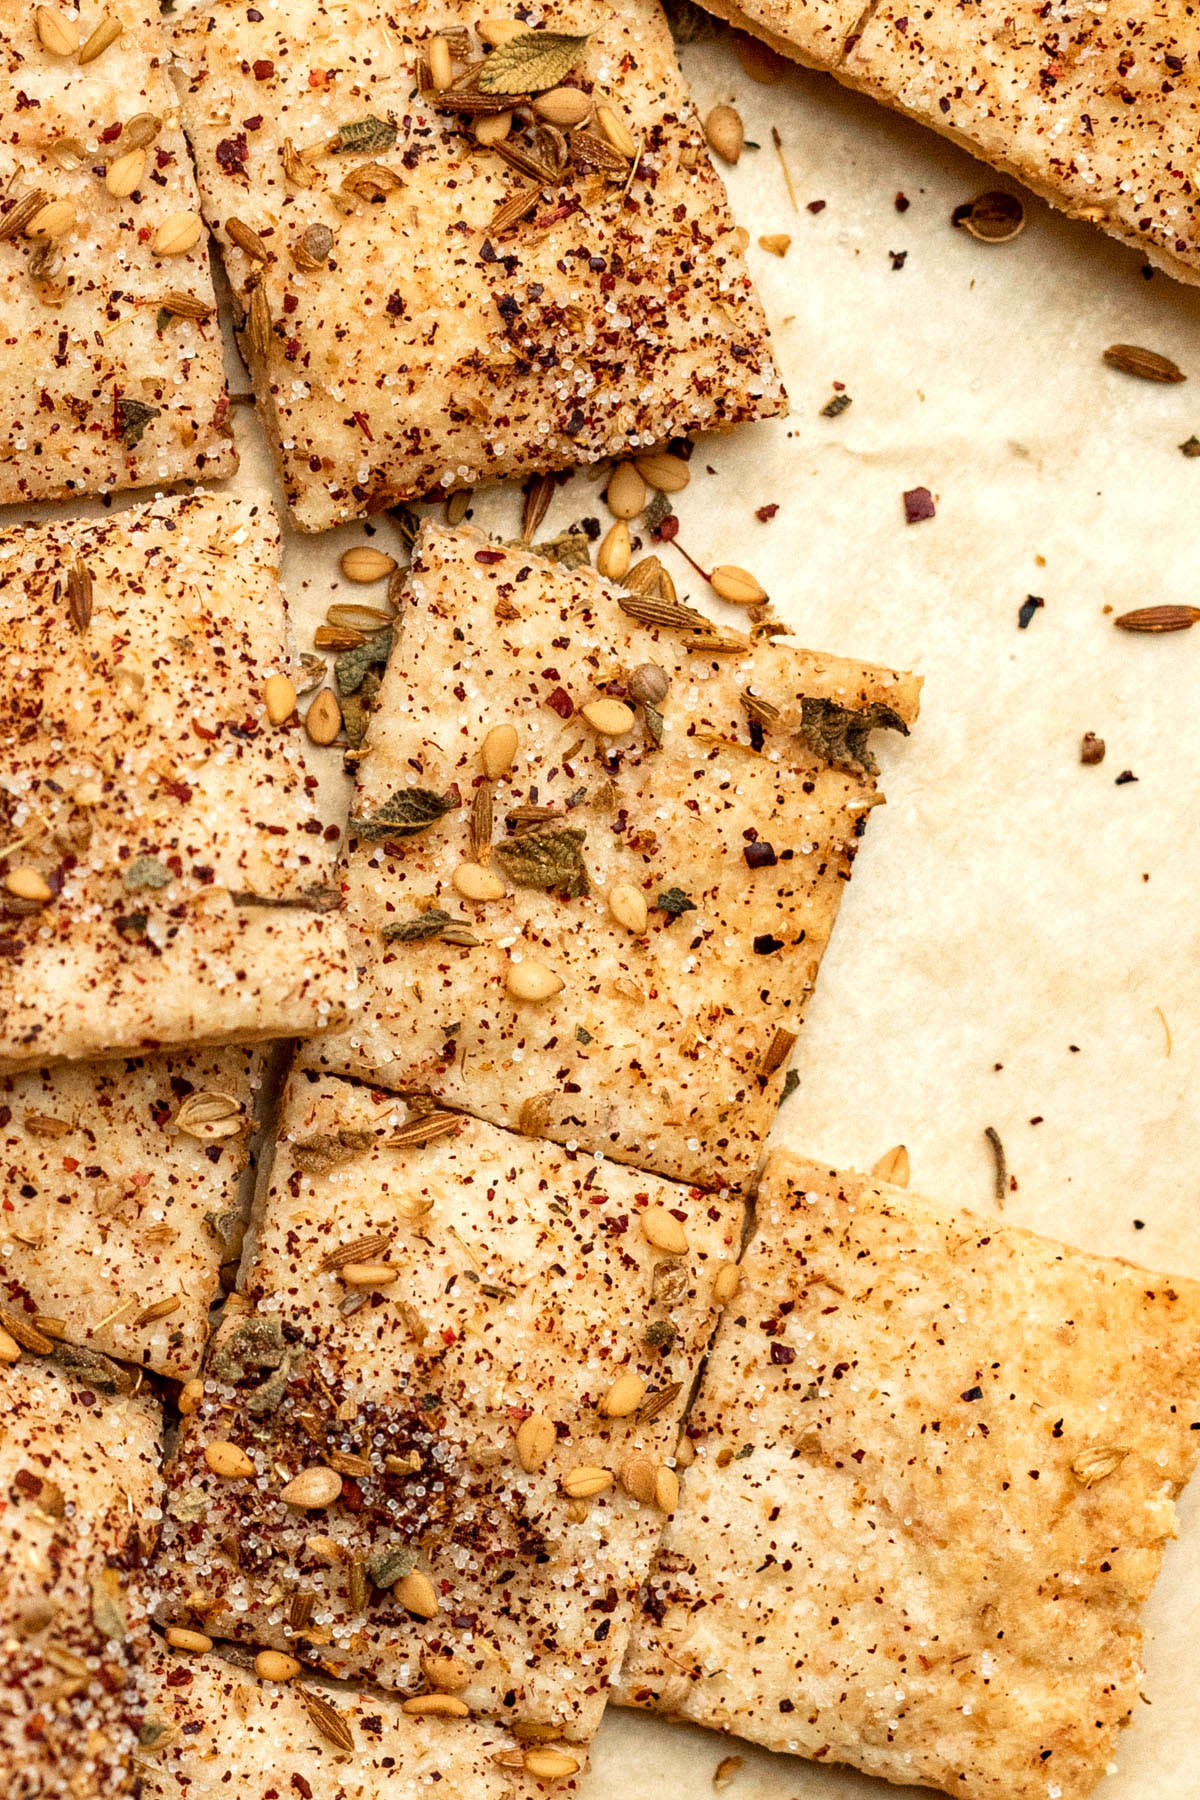 Sourdough crackers topped with Za'atar.